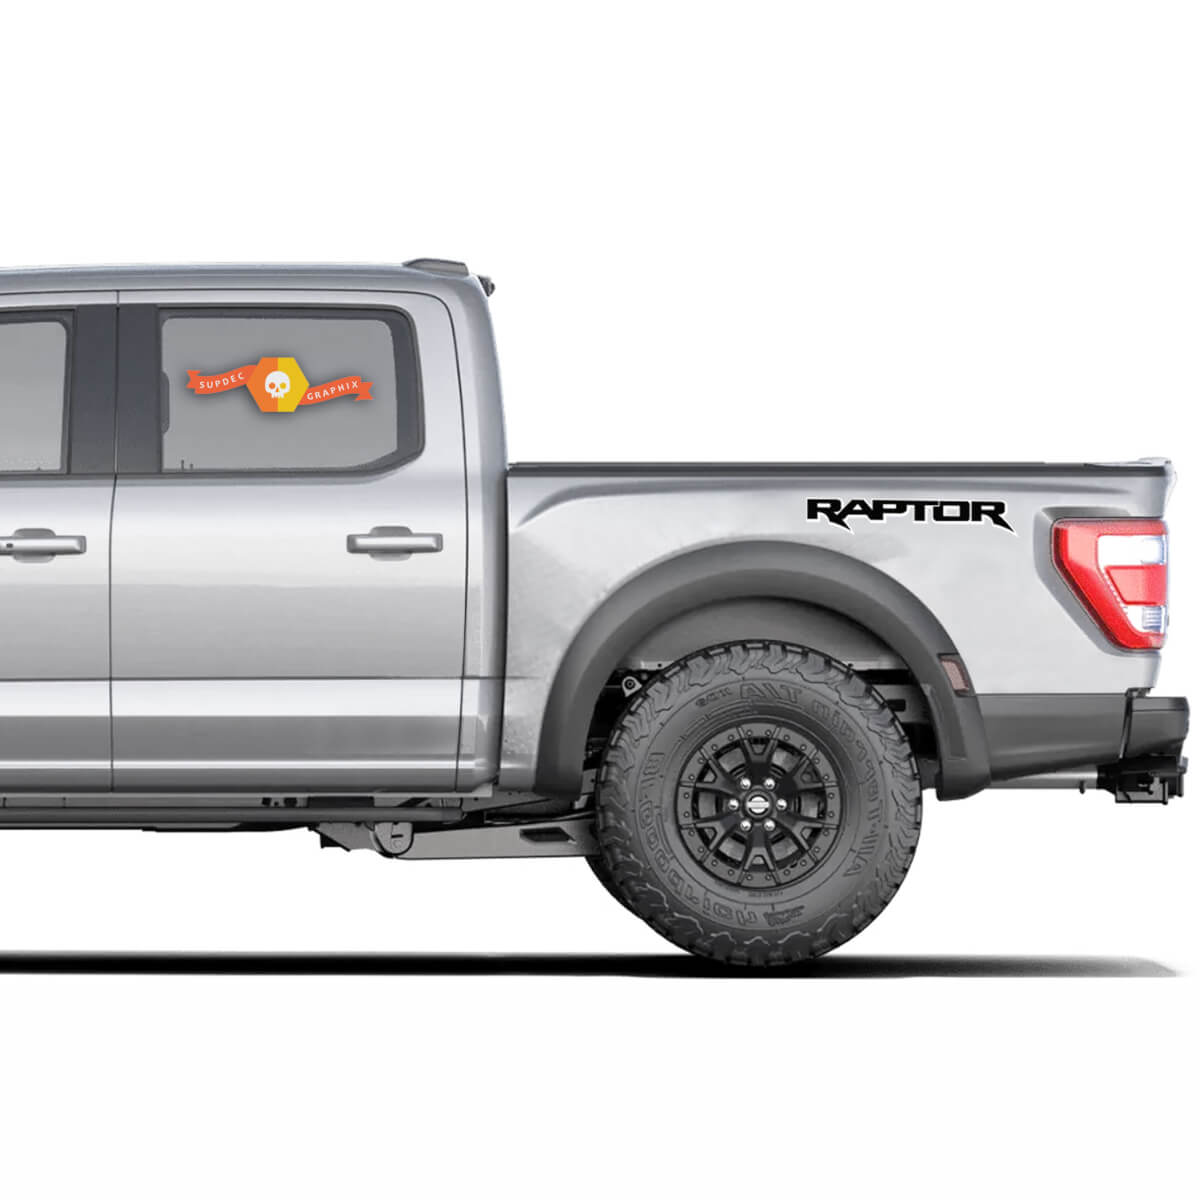 2022 F-150 RAPTOR and Other Years Side Bed Decal Sticker Vinyl Graphics